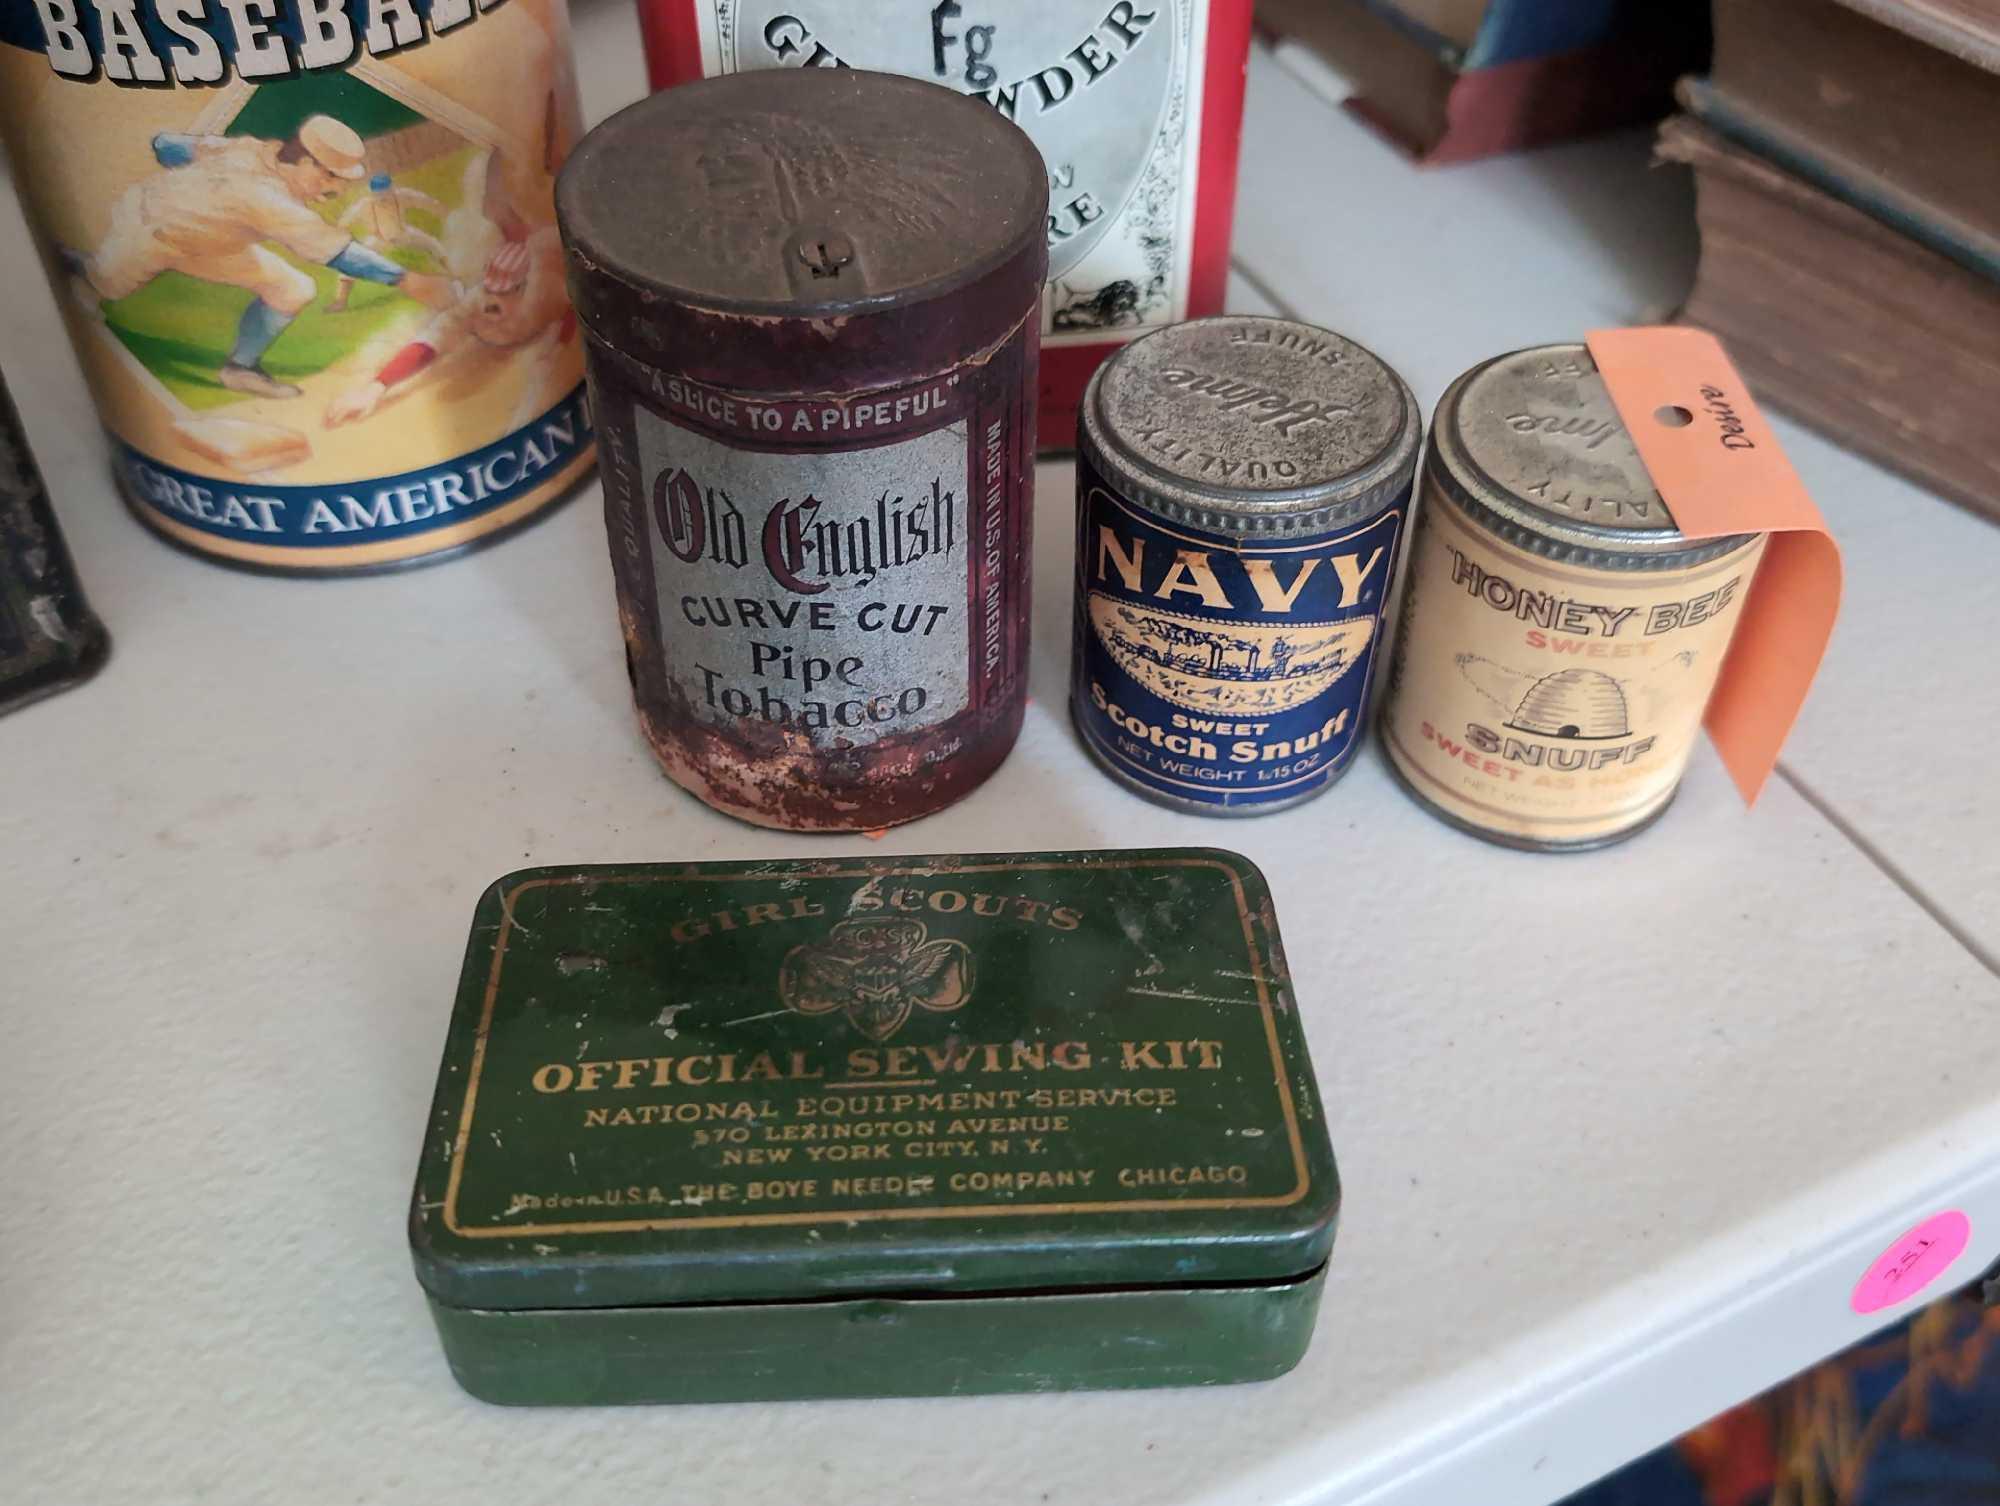 (LR) MISC. VINTAGE TIN LOT TO INCLUDE AN EDGEWORTH PIPE TOBACCO TIN, GIRL SCOUTS OFFICIAL SEWING